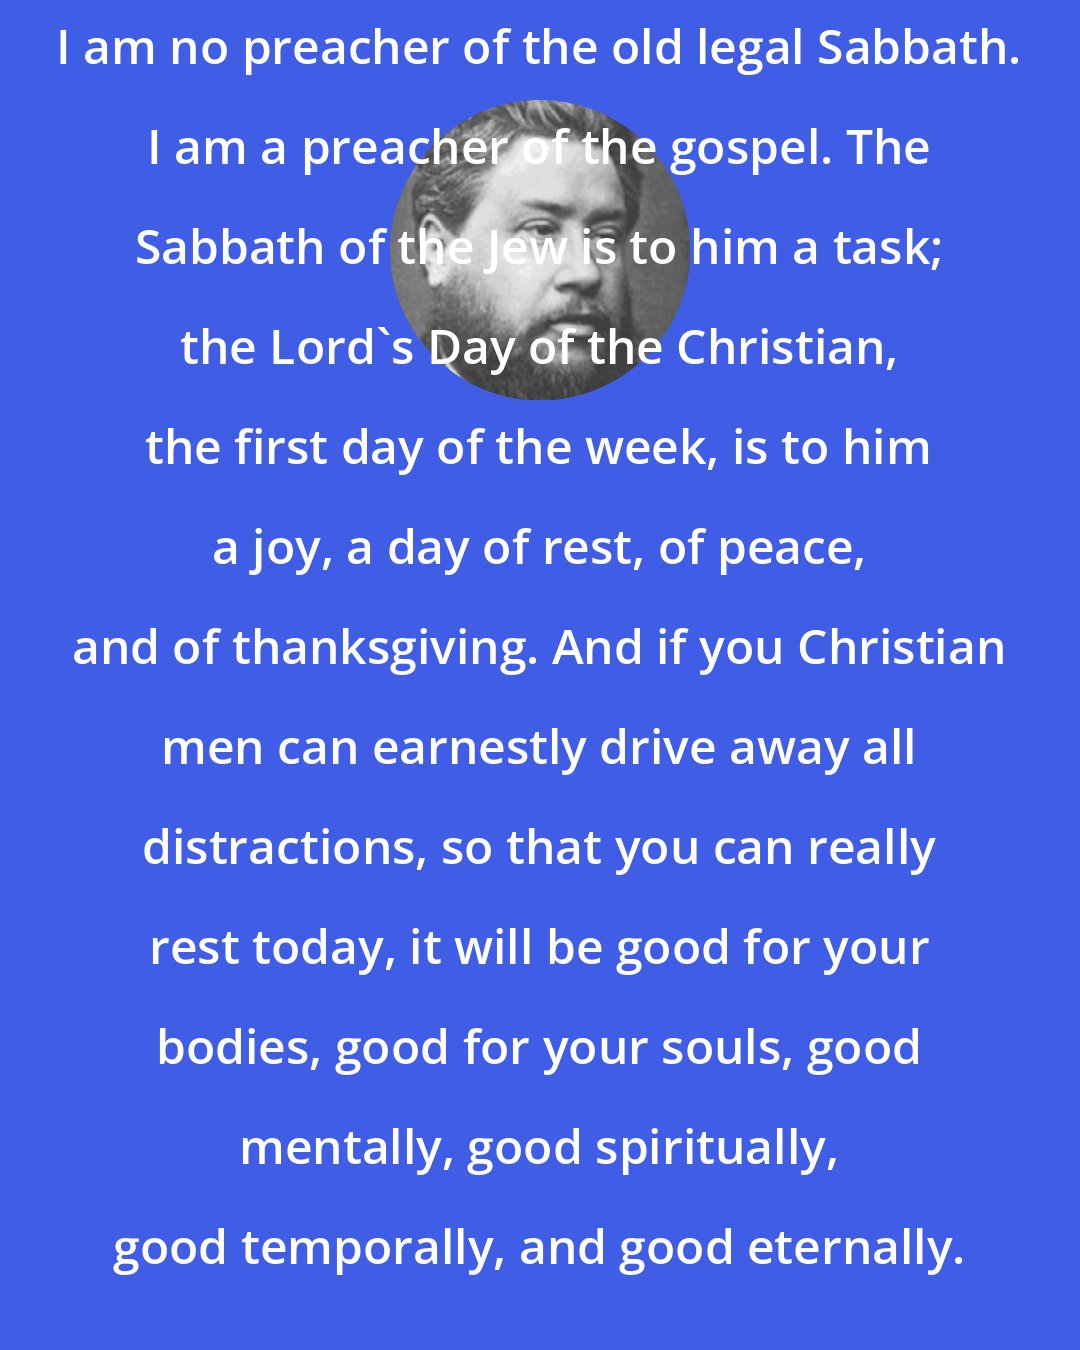 Charles Spurgeon: I am no preacher of the old legal Sabbath. I am a preacher of the gospel. The Sabbath of the Jew is to him a task; the Lord's Day of the Christian, the first day of the week, is to him a joy, a day of rest, of peace, and of thanksgiving. And if you Christian men can earnestly drive away all distractions, so that you can really rest today, it will be good for your bodies, good for your souls, good mentally, good spiritually, good temporally, and good eternally.